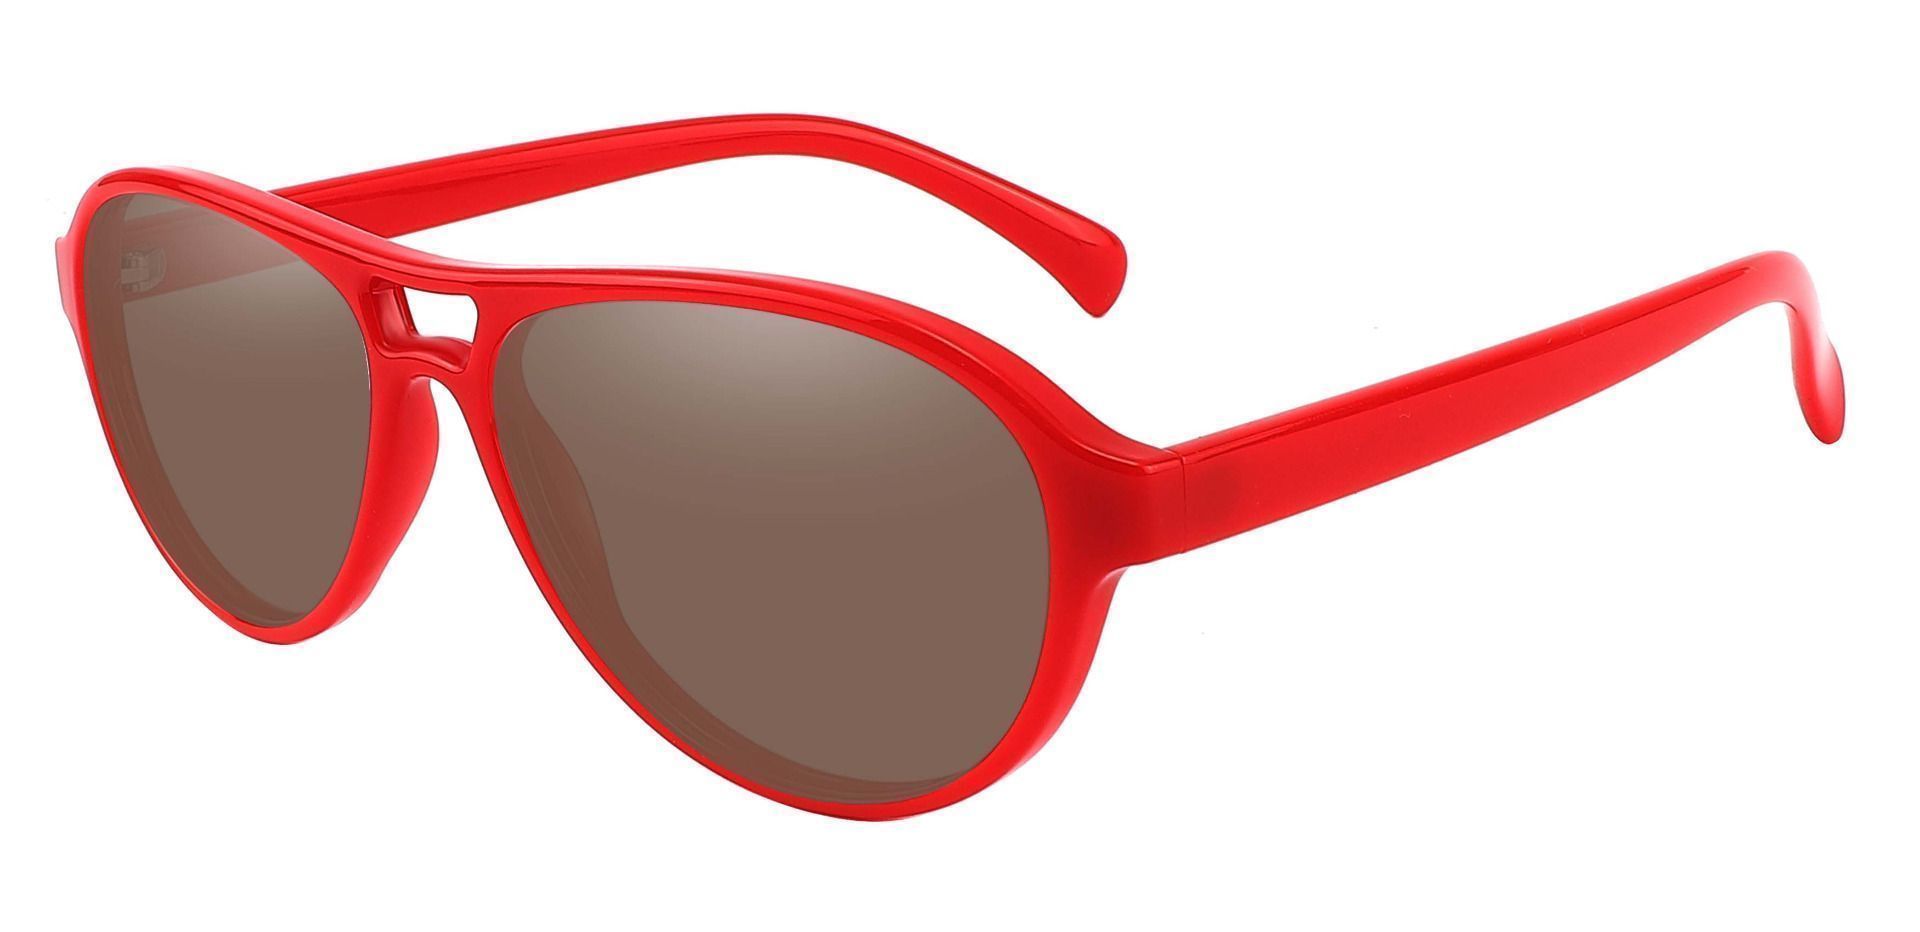 Sosa Aviator Non-Rx Sunglasses - Red Frame With Brown Lenses